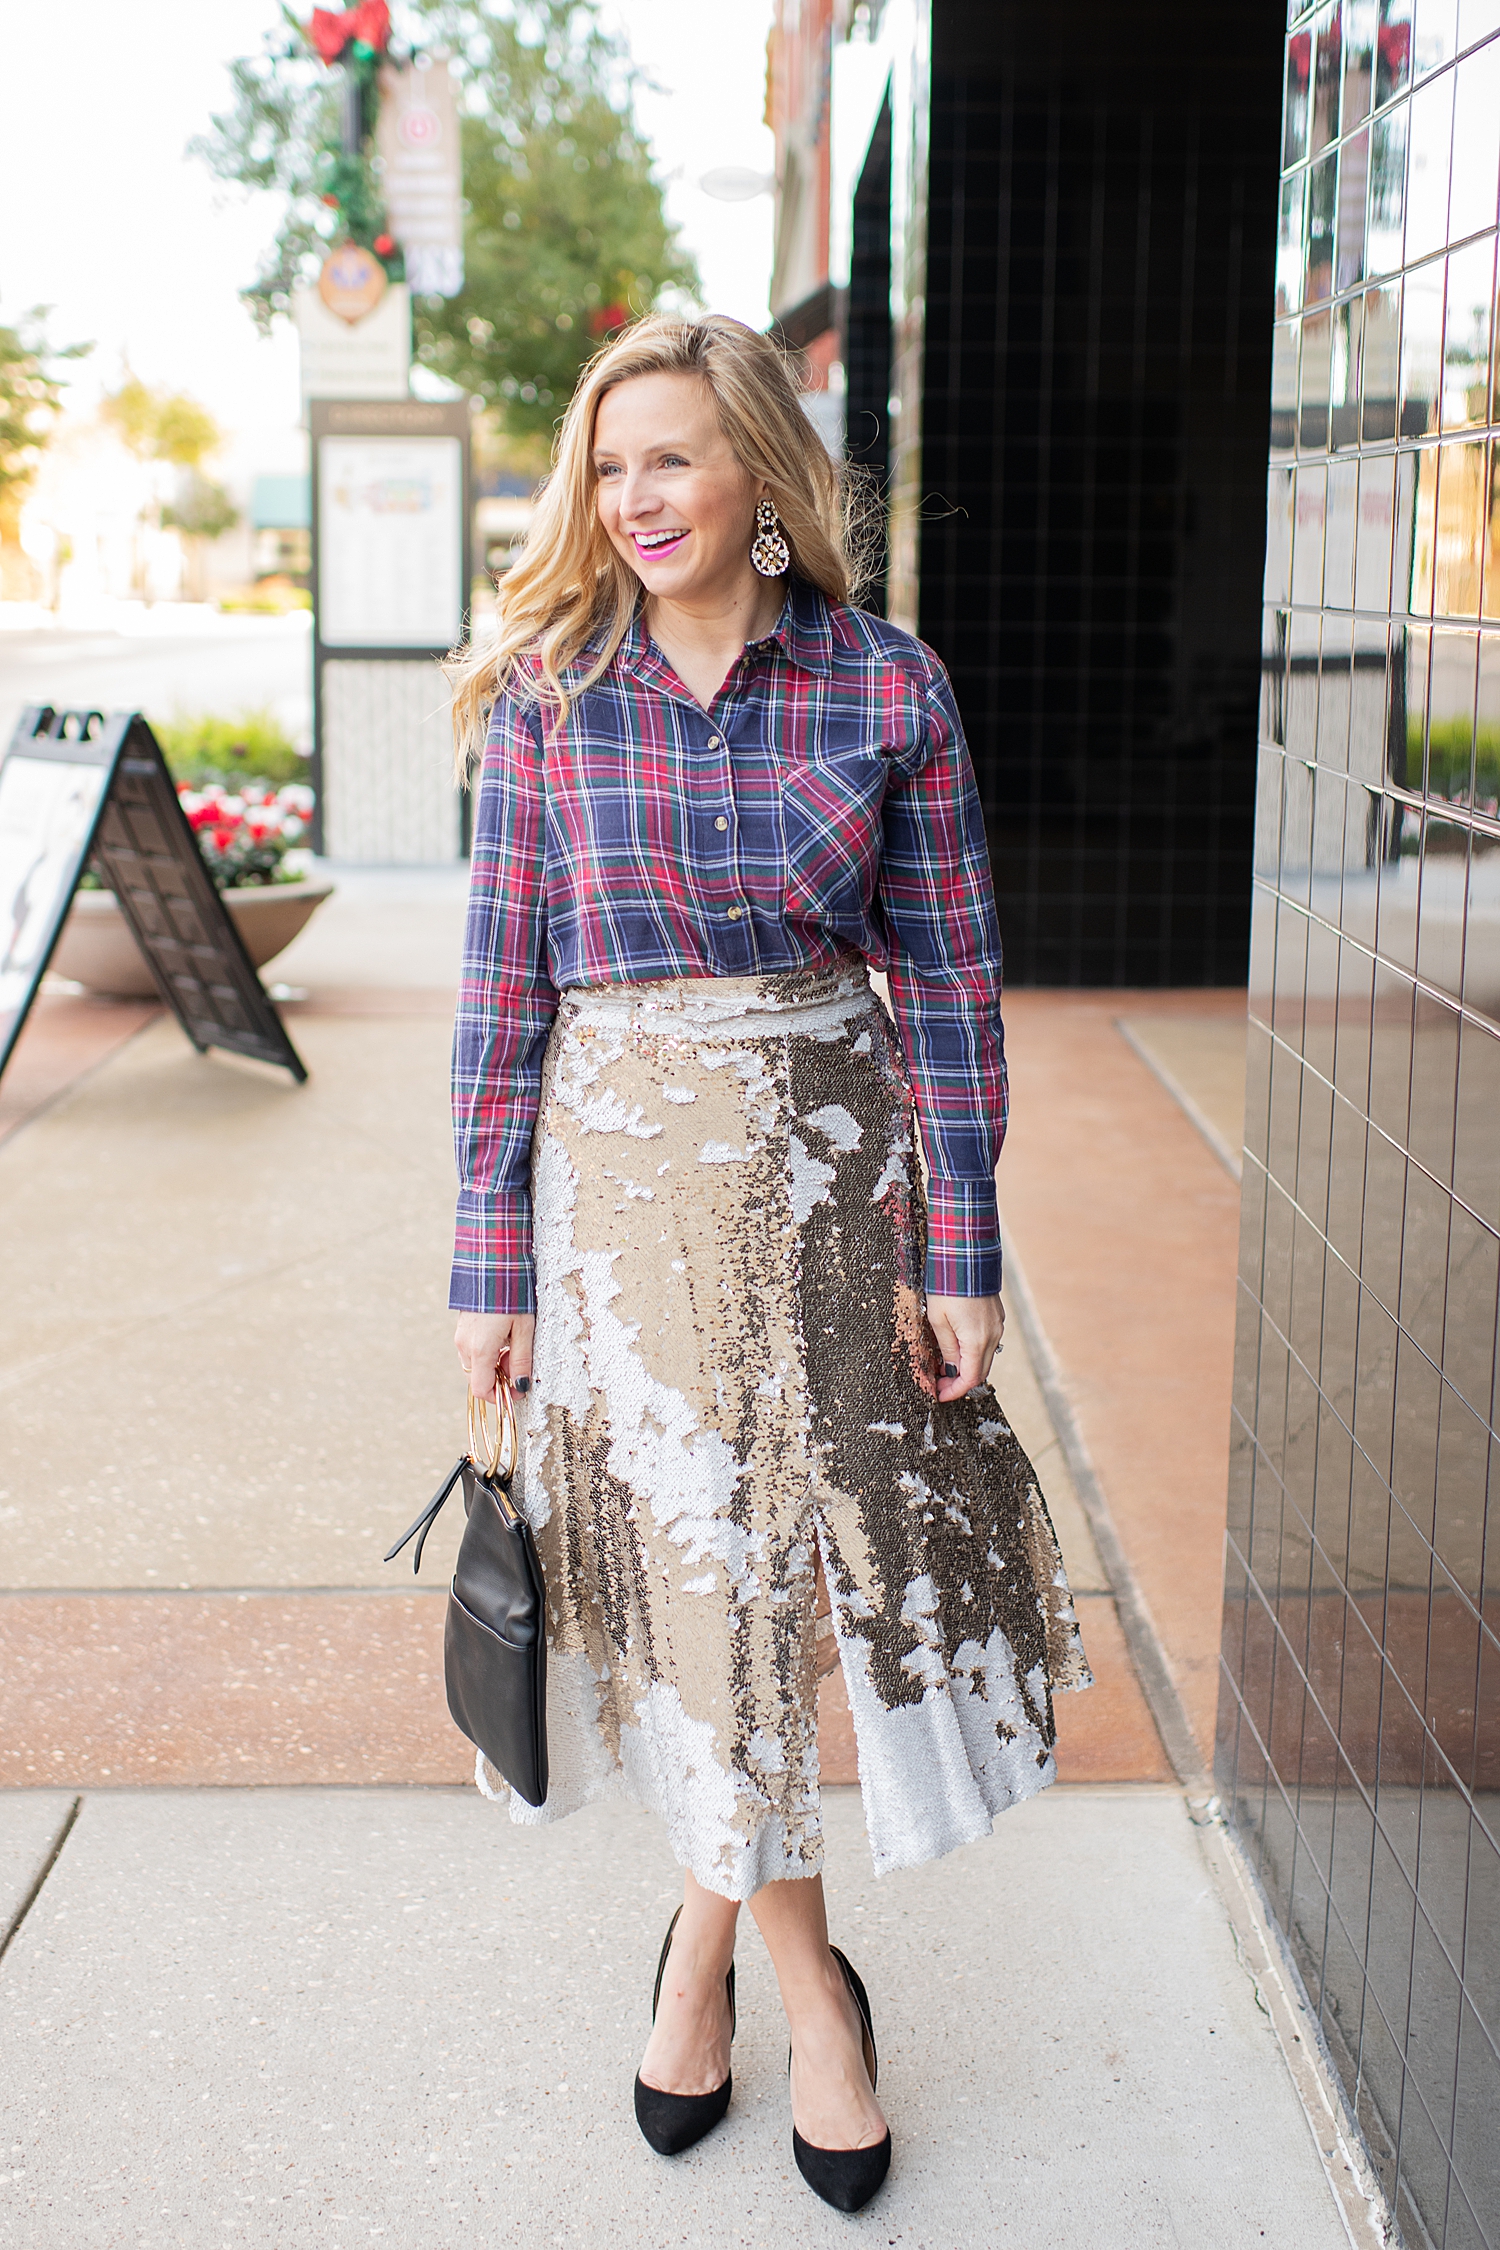 Top Houston fashion blogger, Fancy Ashley, features 7 Holiday Outfits perfect for the season: image of a woman wearing TOPSHOP plaid shirt, Eliza J sequin skirt, Kate Spade earrings, blck clutch all available at Nordstrom